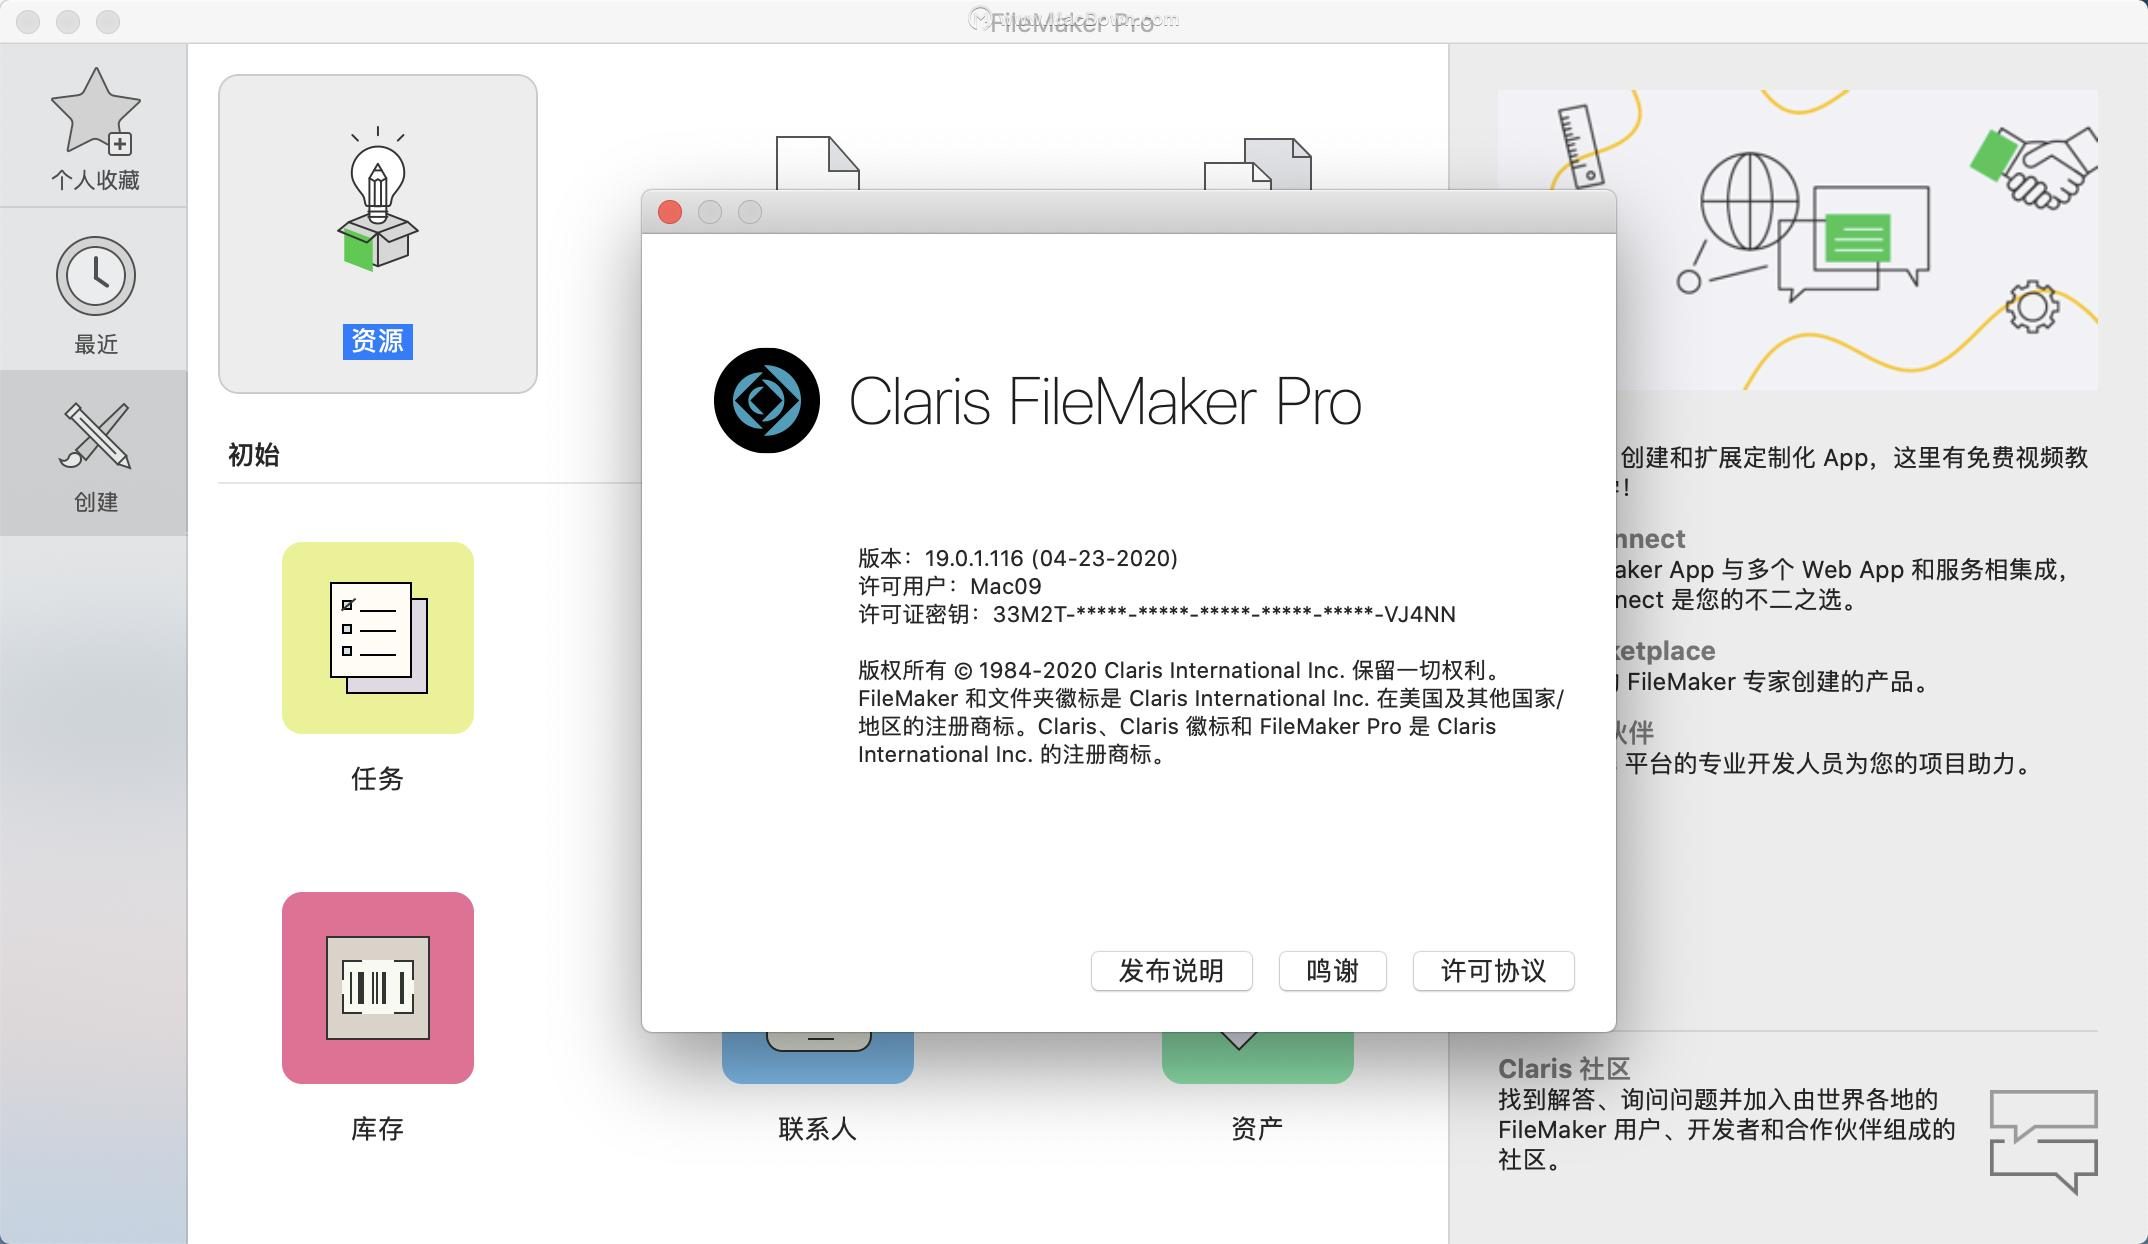 download the new for android FileMaker Pro / Server 20.2.1.60